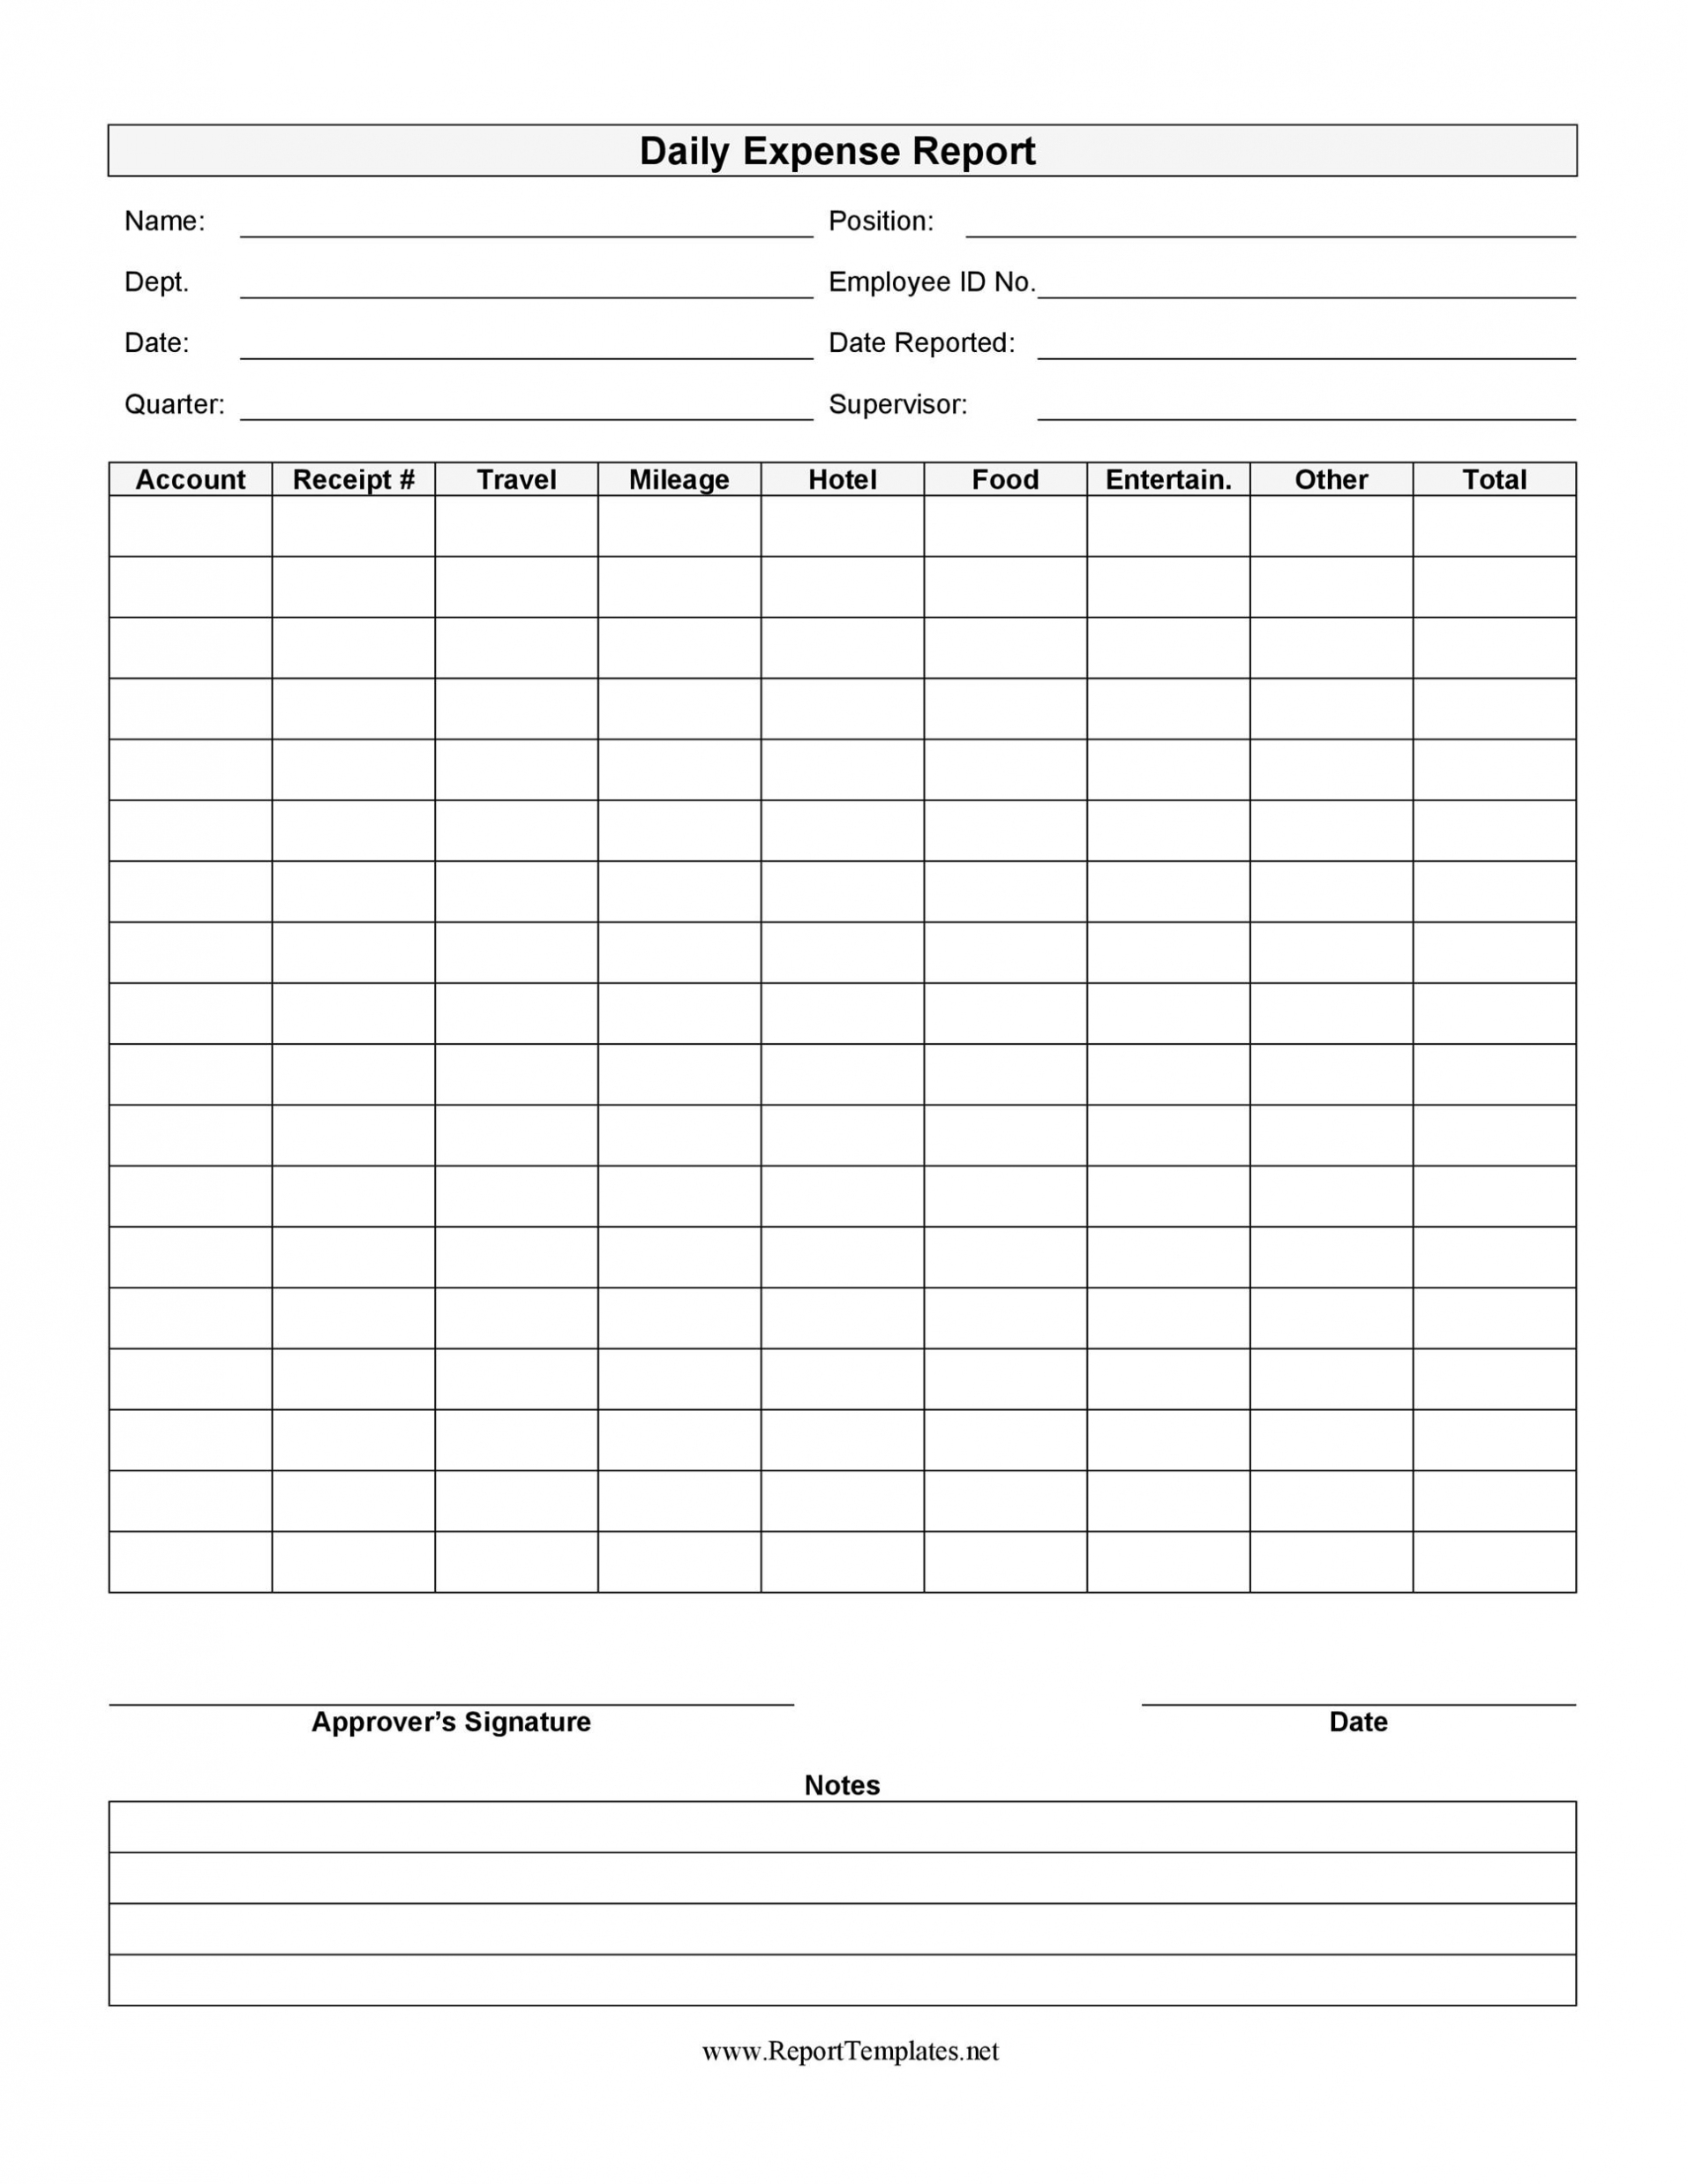 daily-expense-report-template